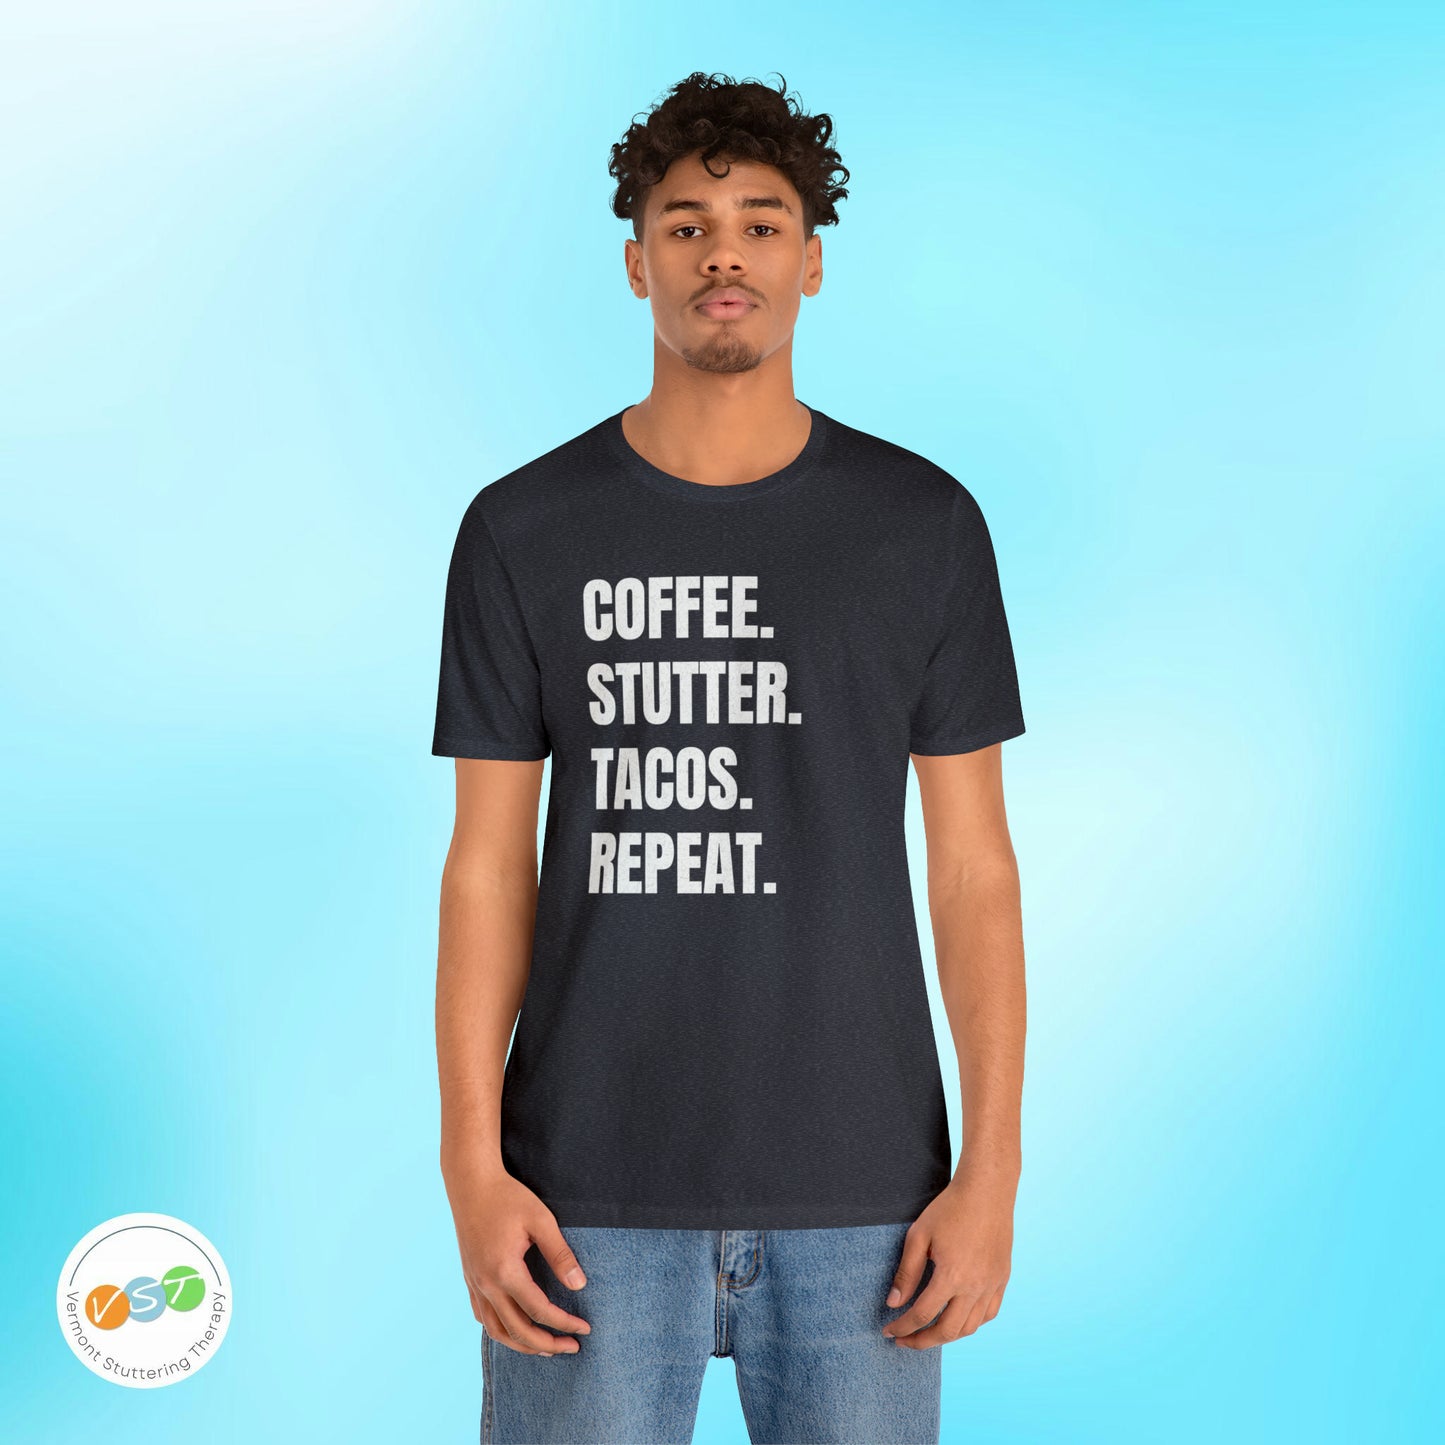 Coffee. Stutter. Tacos. Repeat. T-shirt